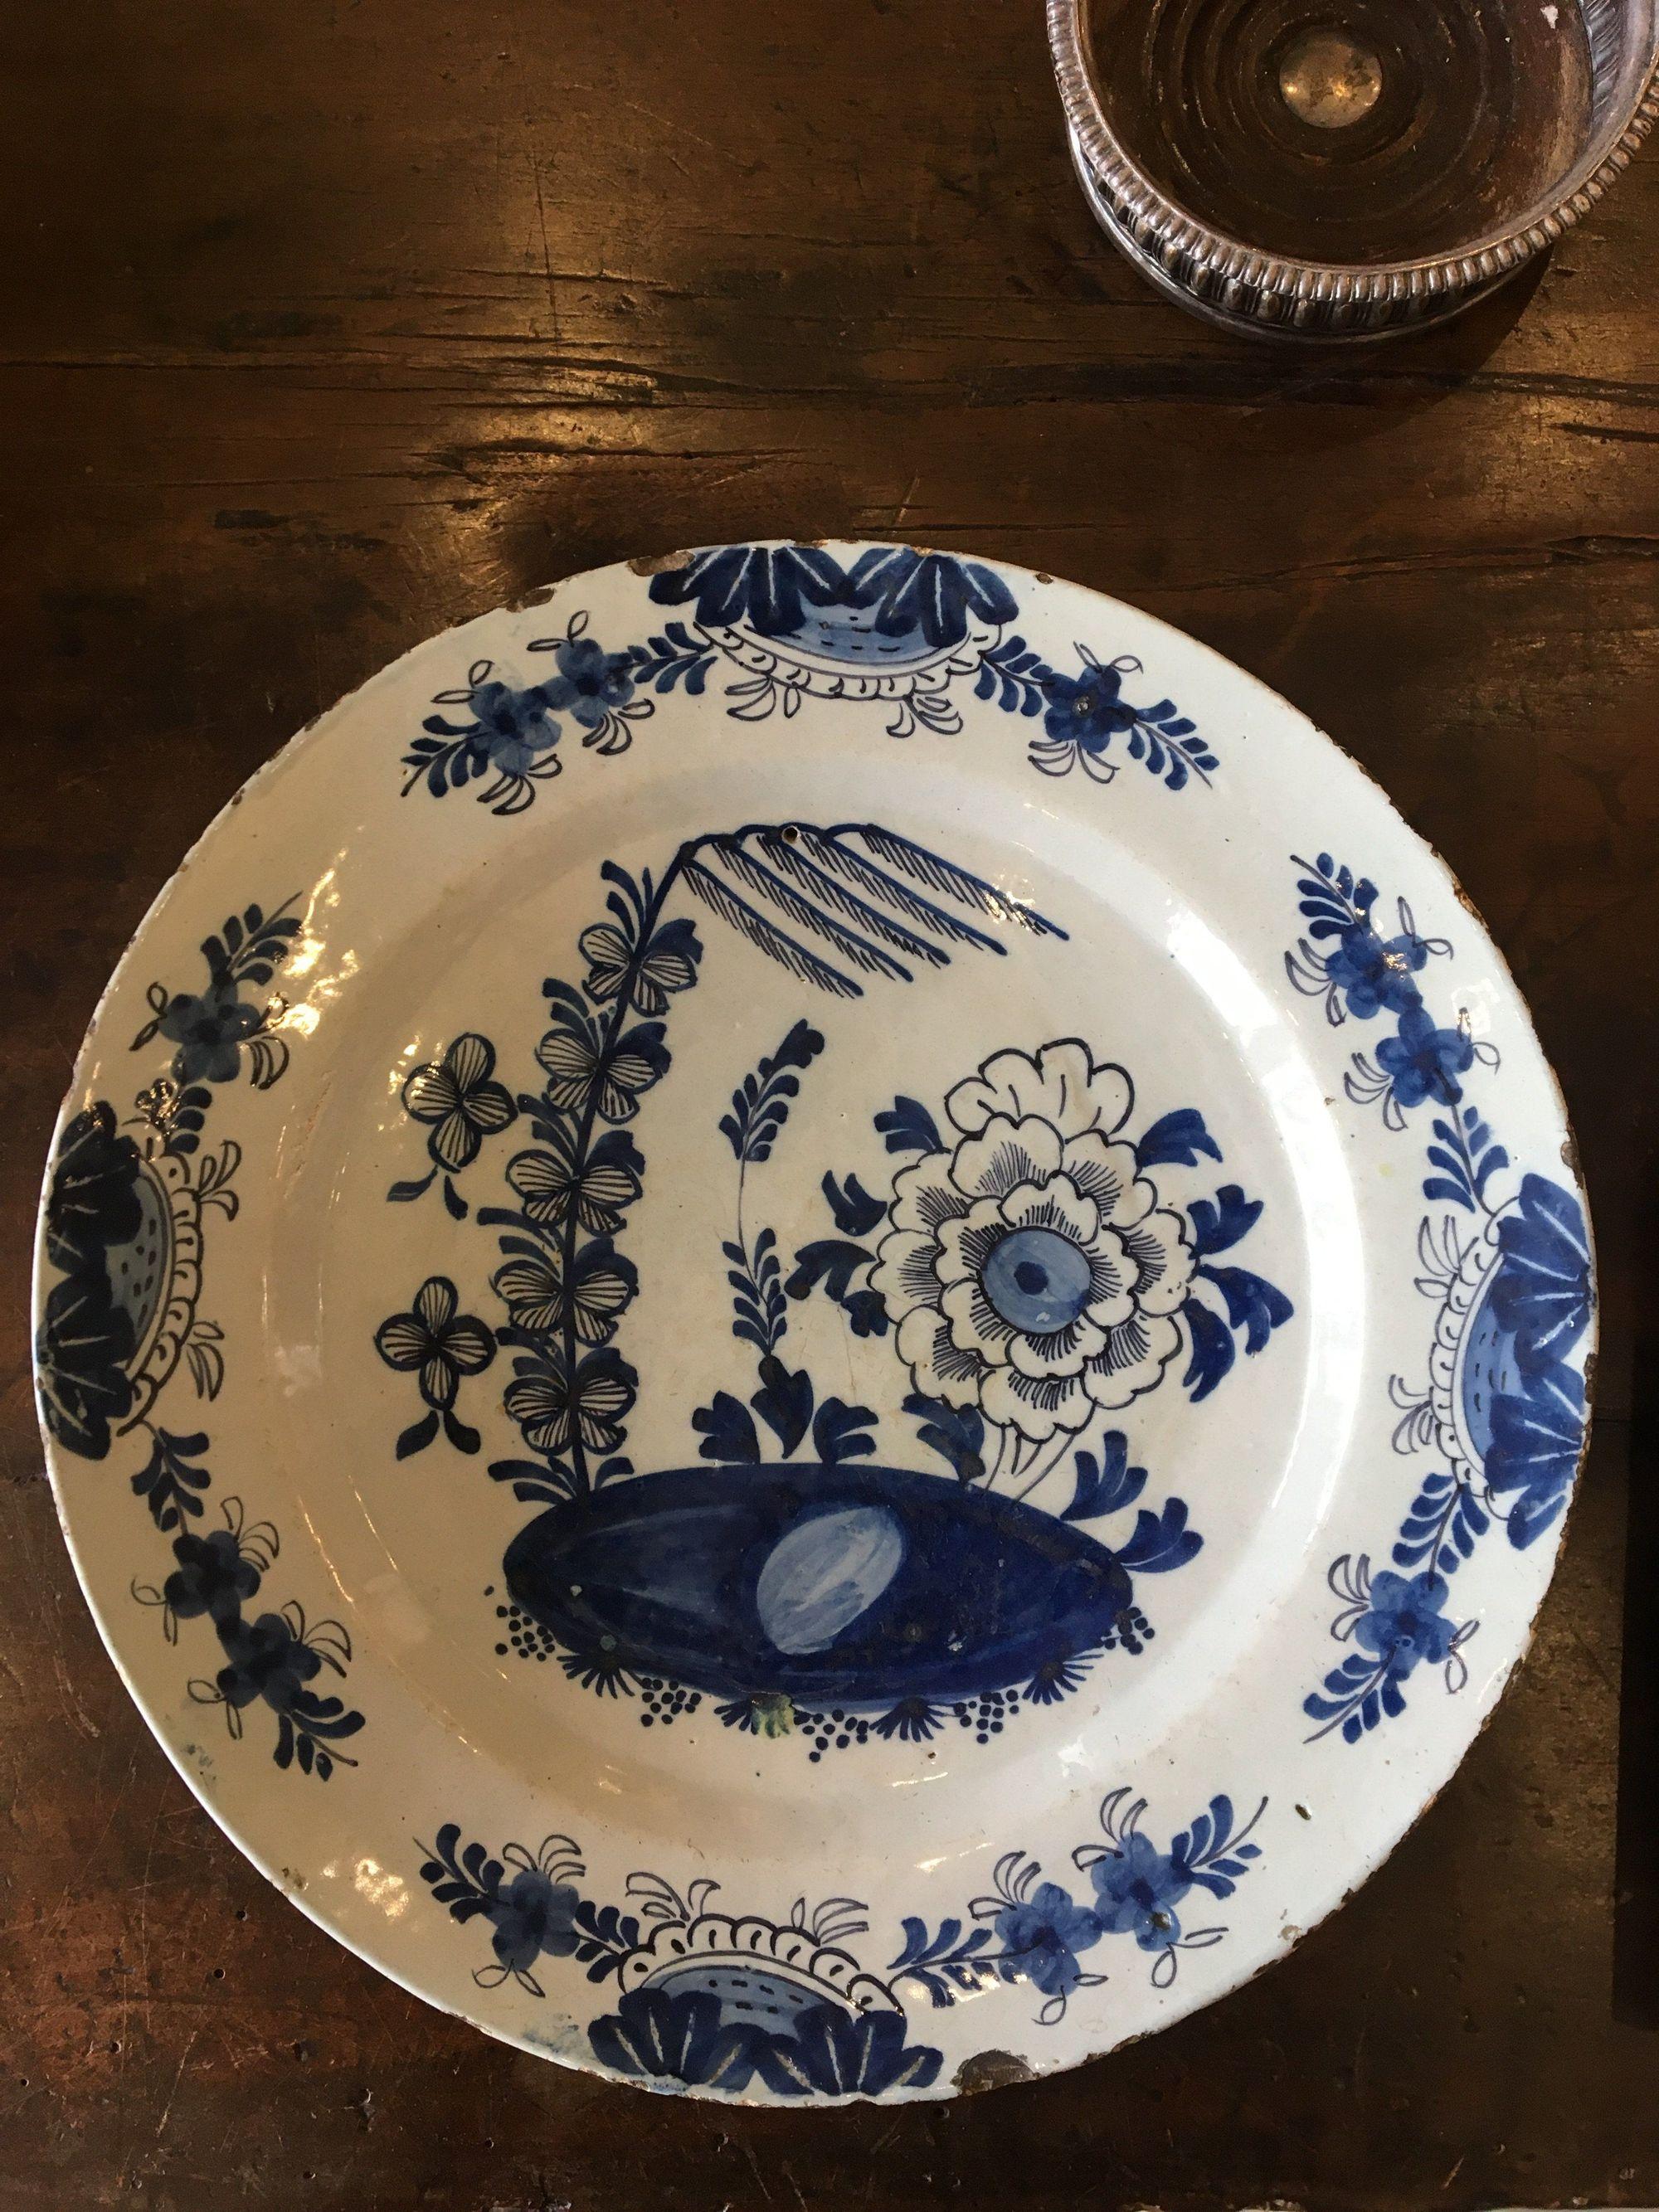 Dutch delft charger, 18th century, blue and white. 13 ½” diameter.